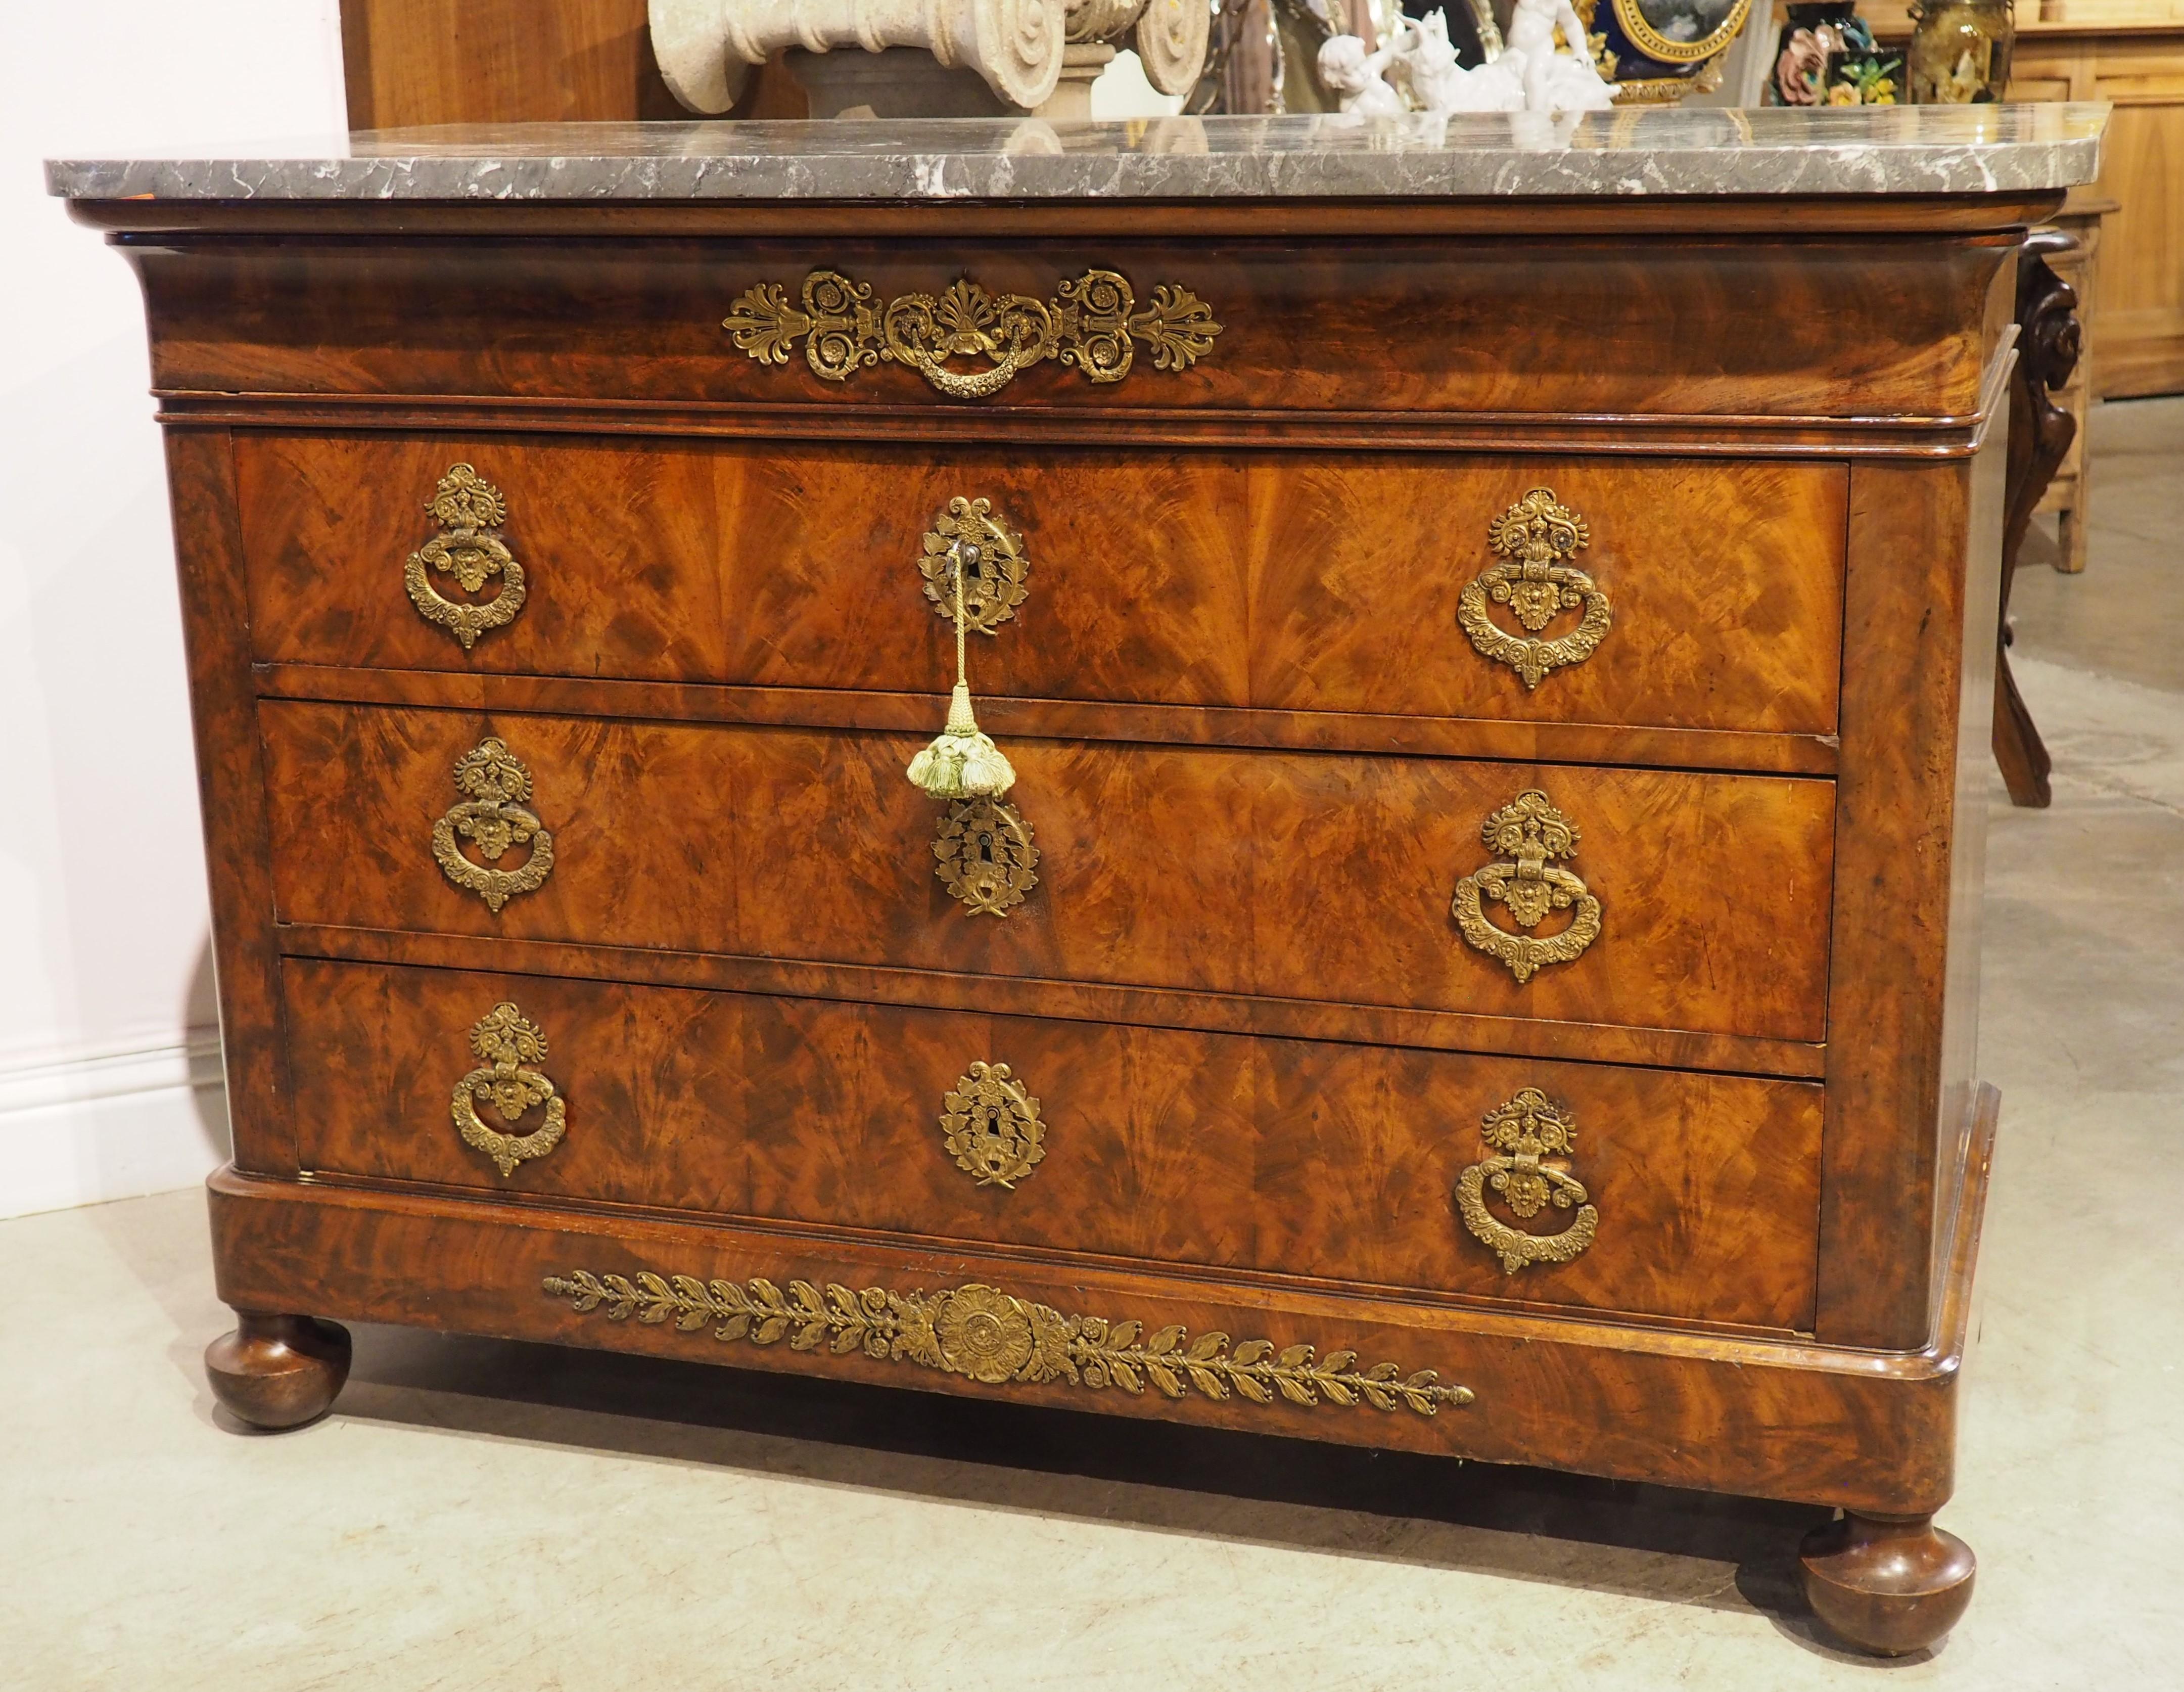 Circa 1820 French Restauration Commode in Flame Mahogany, Gilt Bronze Hardware For Sale 13